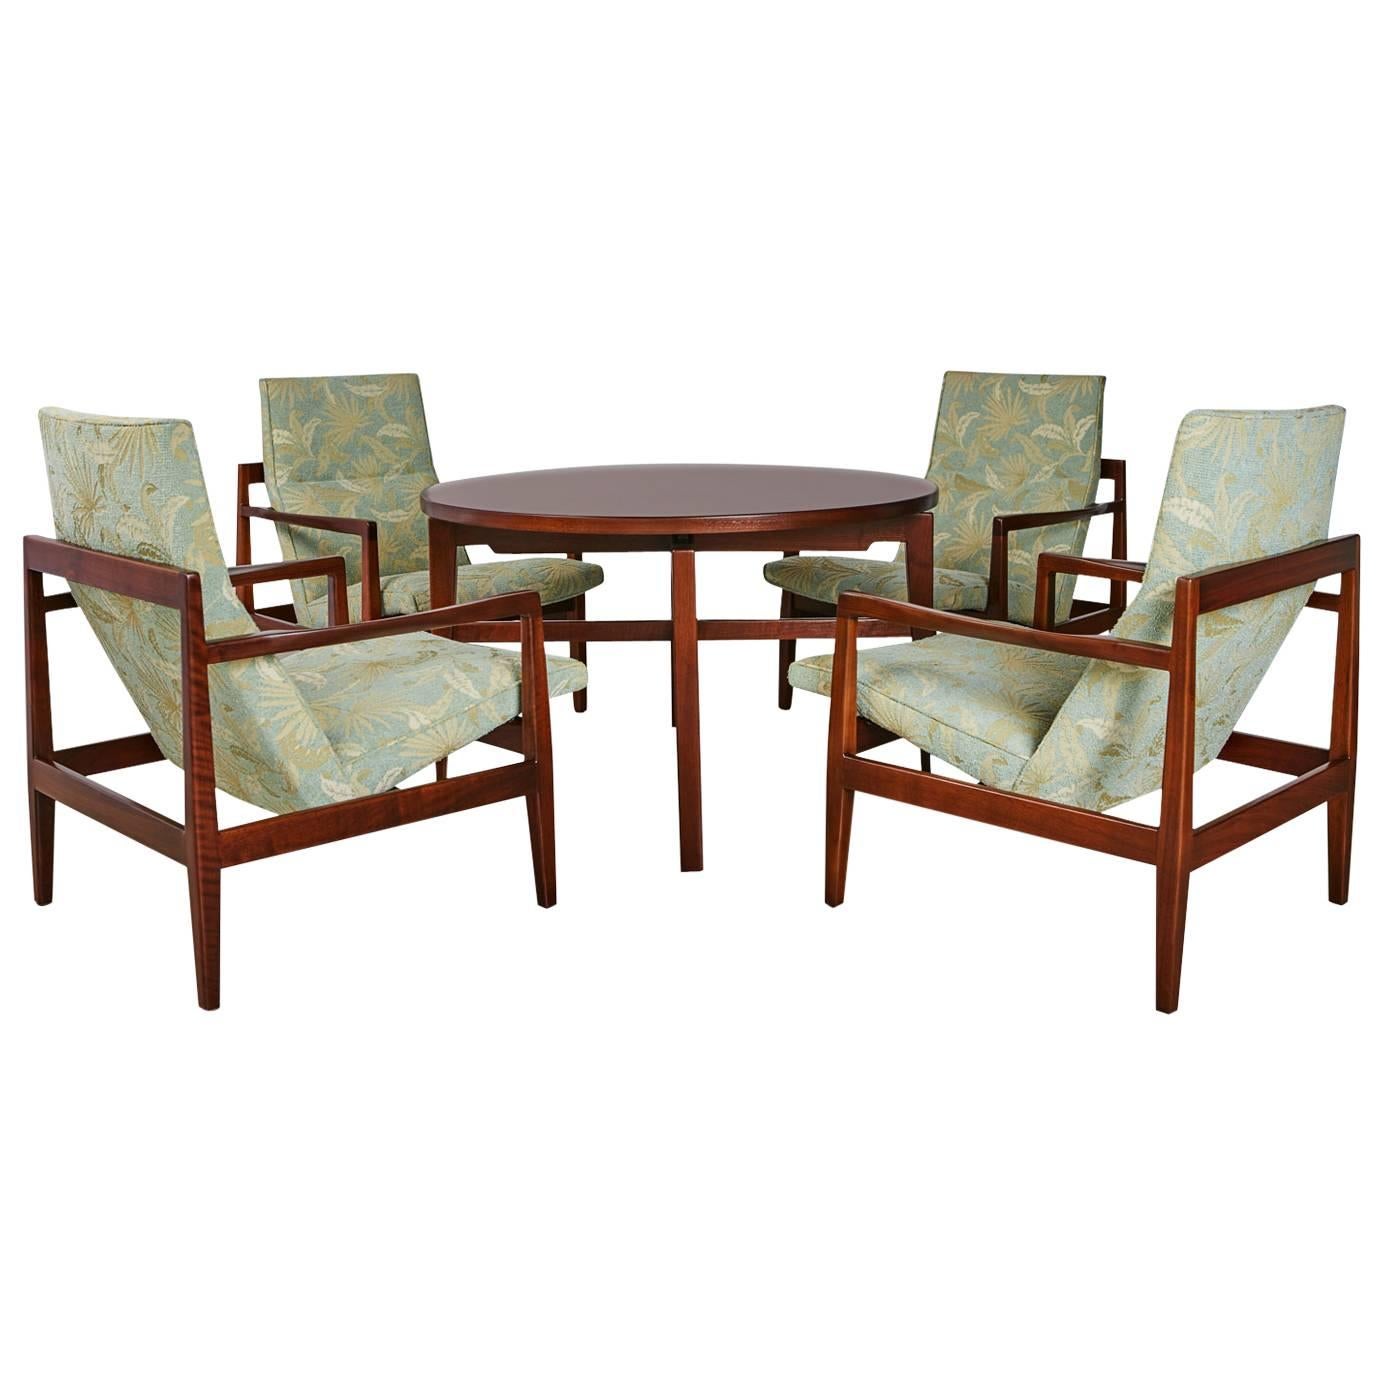 Jens Risom Floating Walnut Lounge Chairs Set of Four (4), Restored, Circa 1960